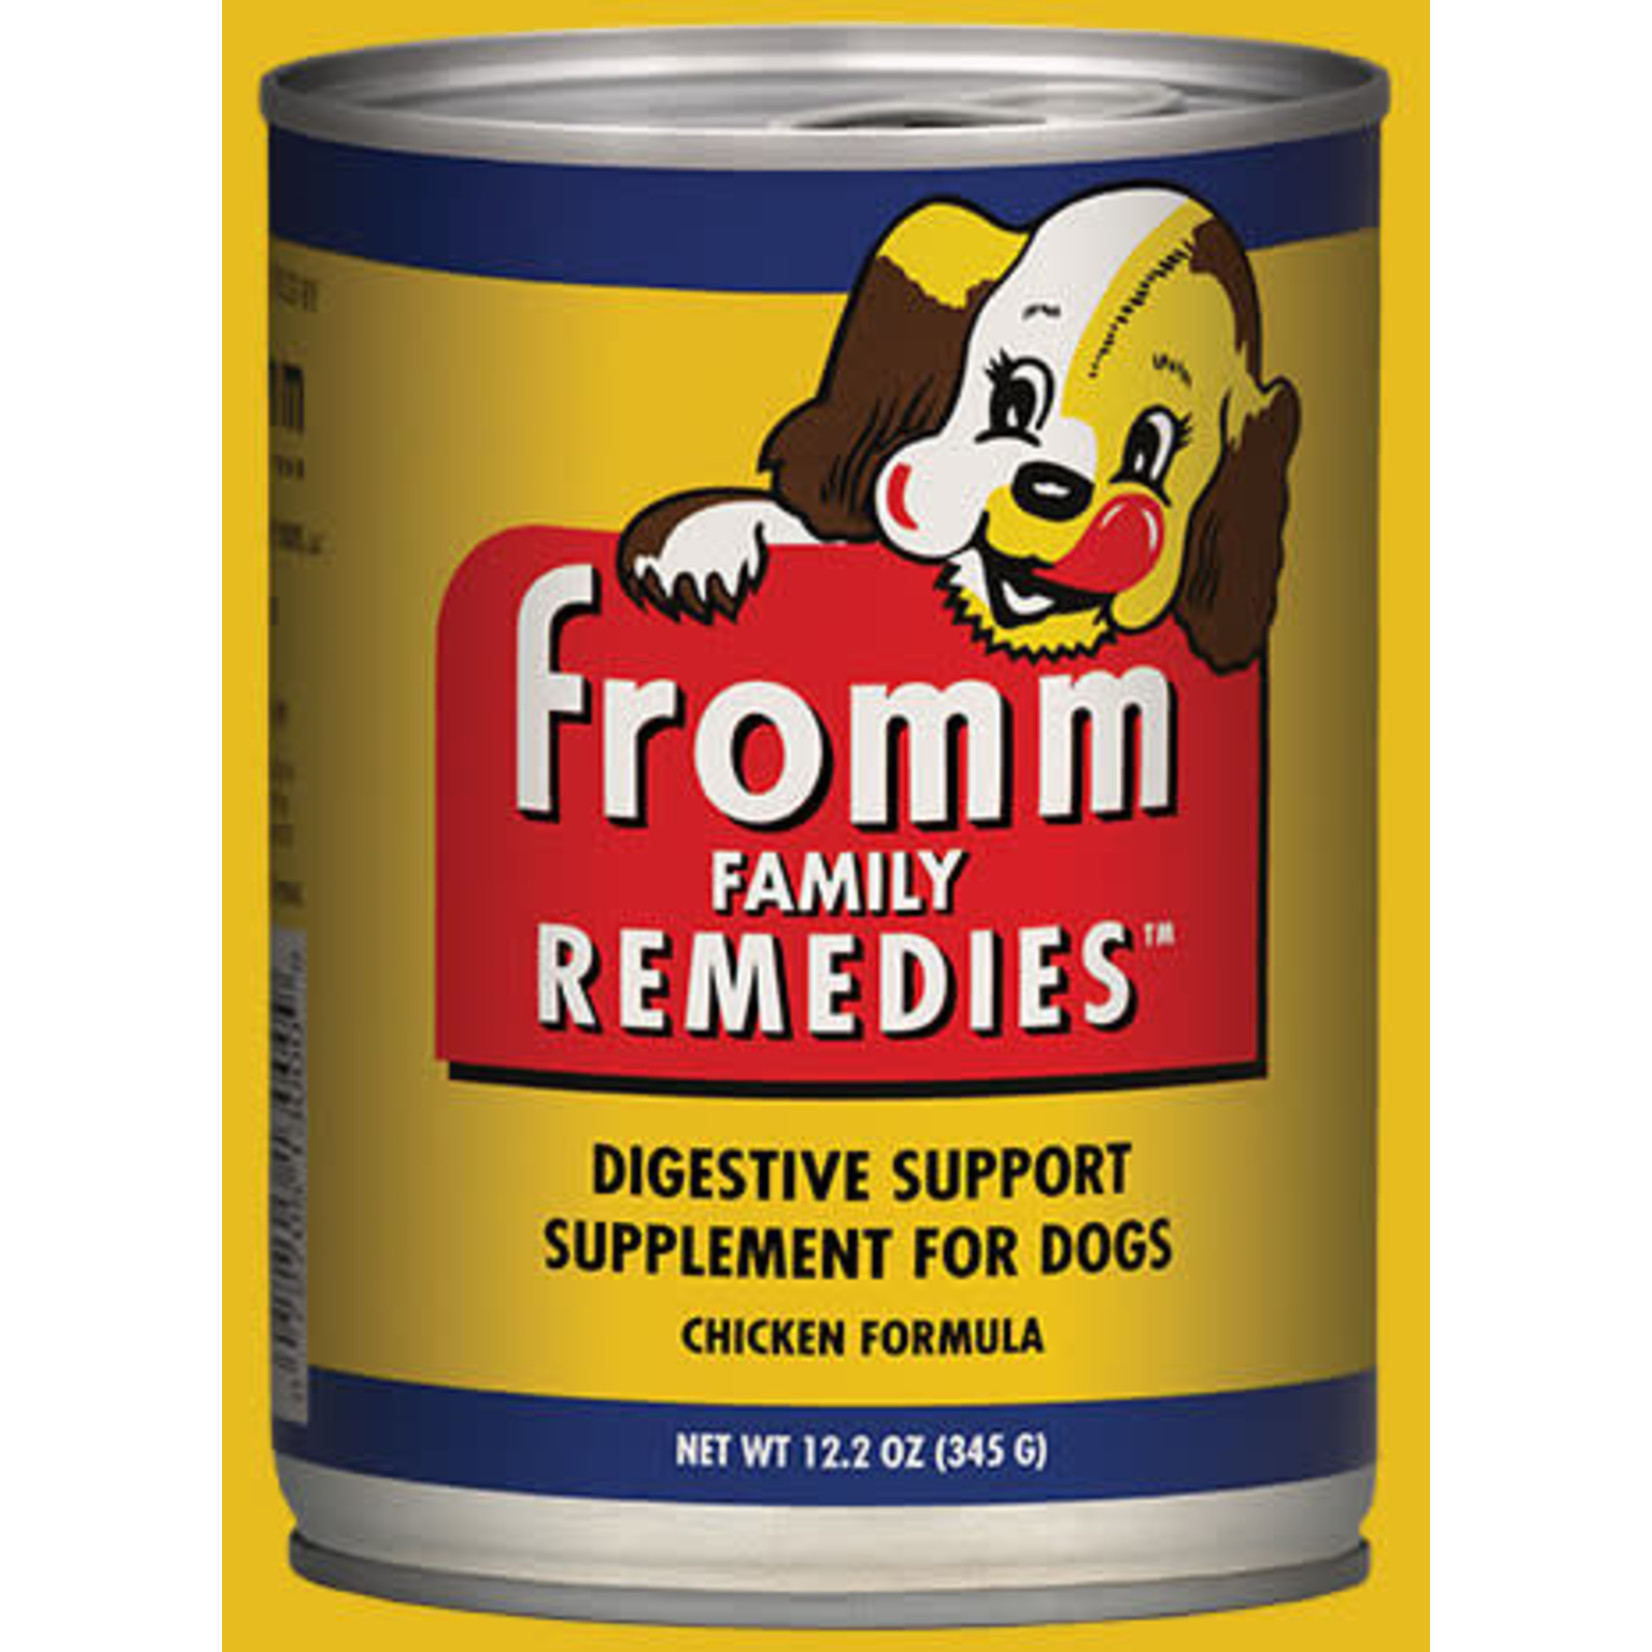 Fromm Family FROMM Remedies Digestive Support Chicken Dog Supplement 12.2oz